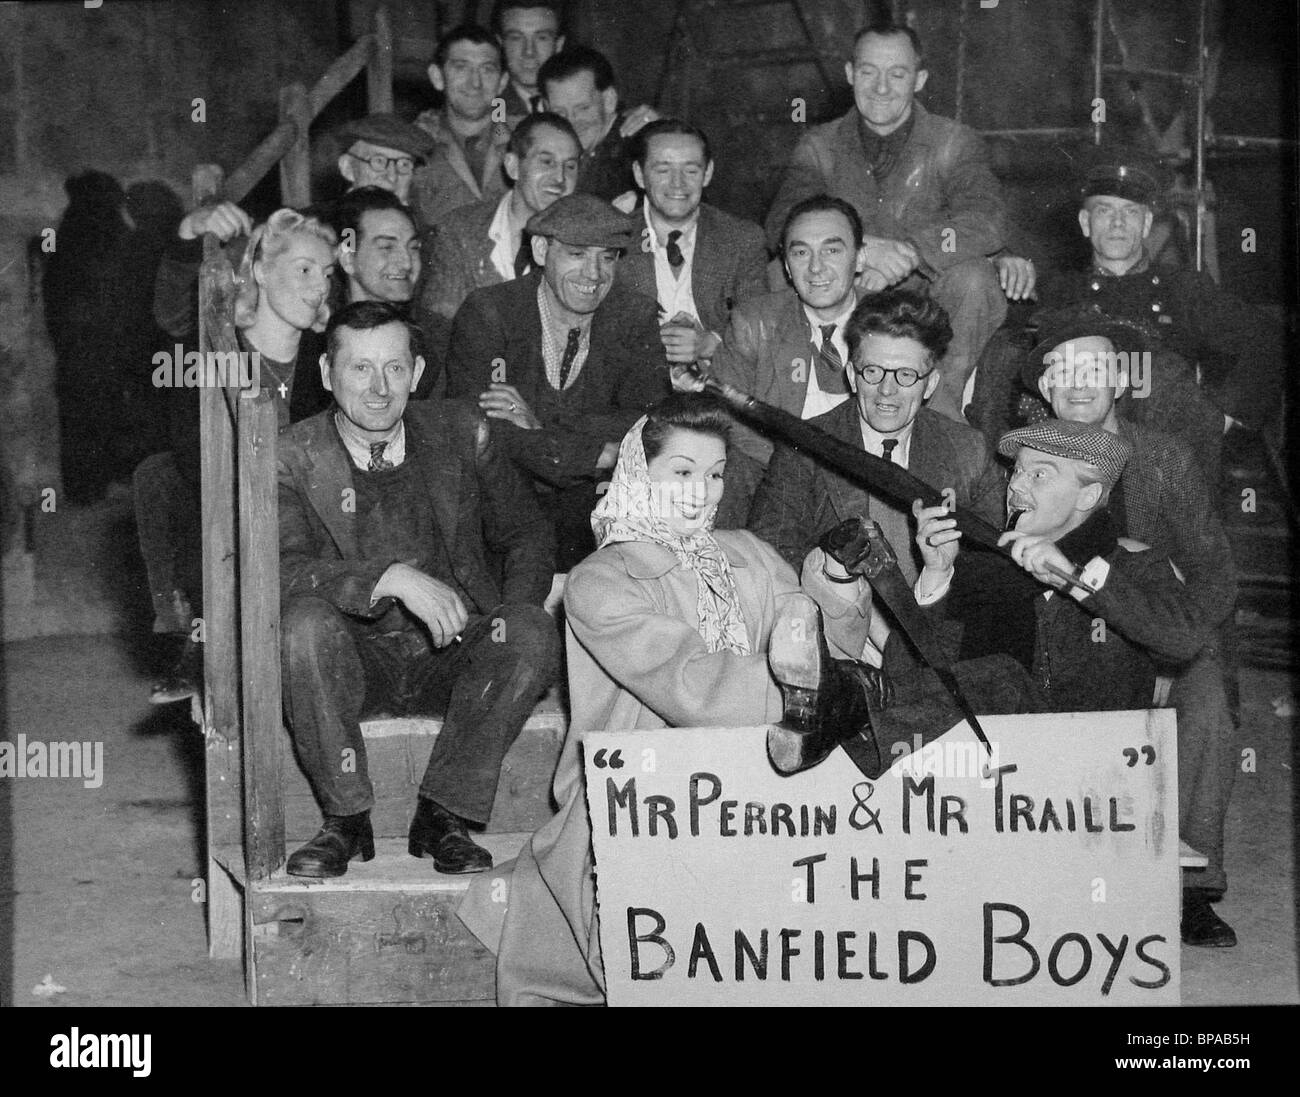 GRETA GYNT, MARIUS GORING WITH THE BANFIELD BOYS, MR. PERRIN AND MR. TRAILL, 1948 Stock Photo